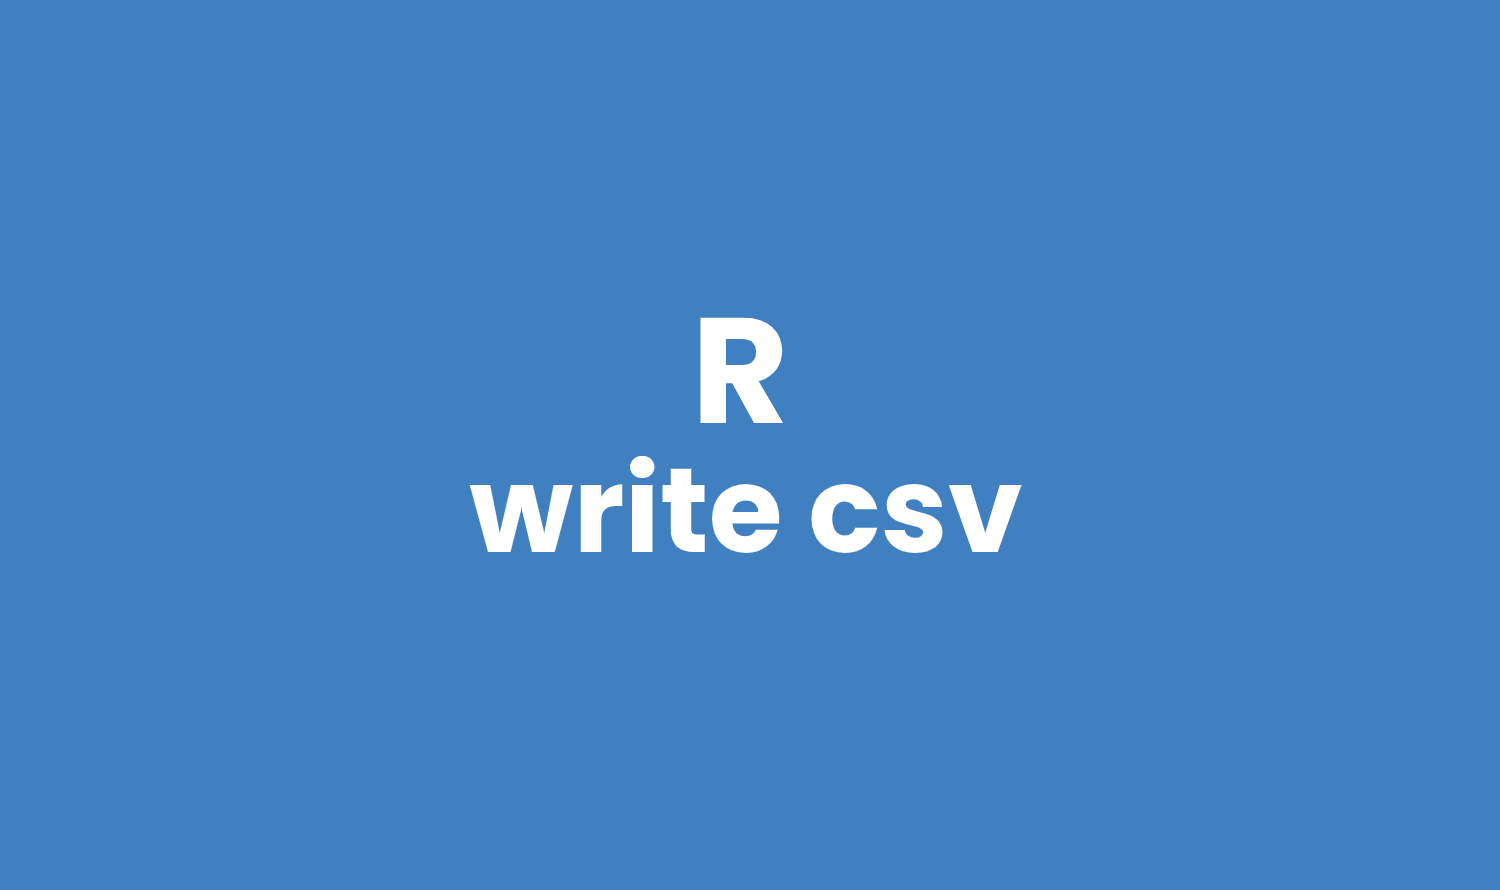 How to Write CSV in R